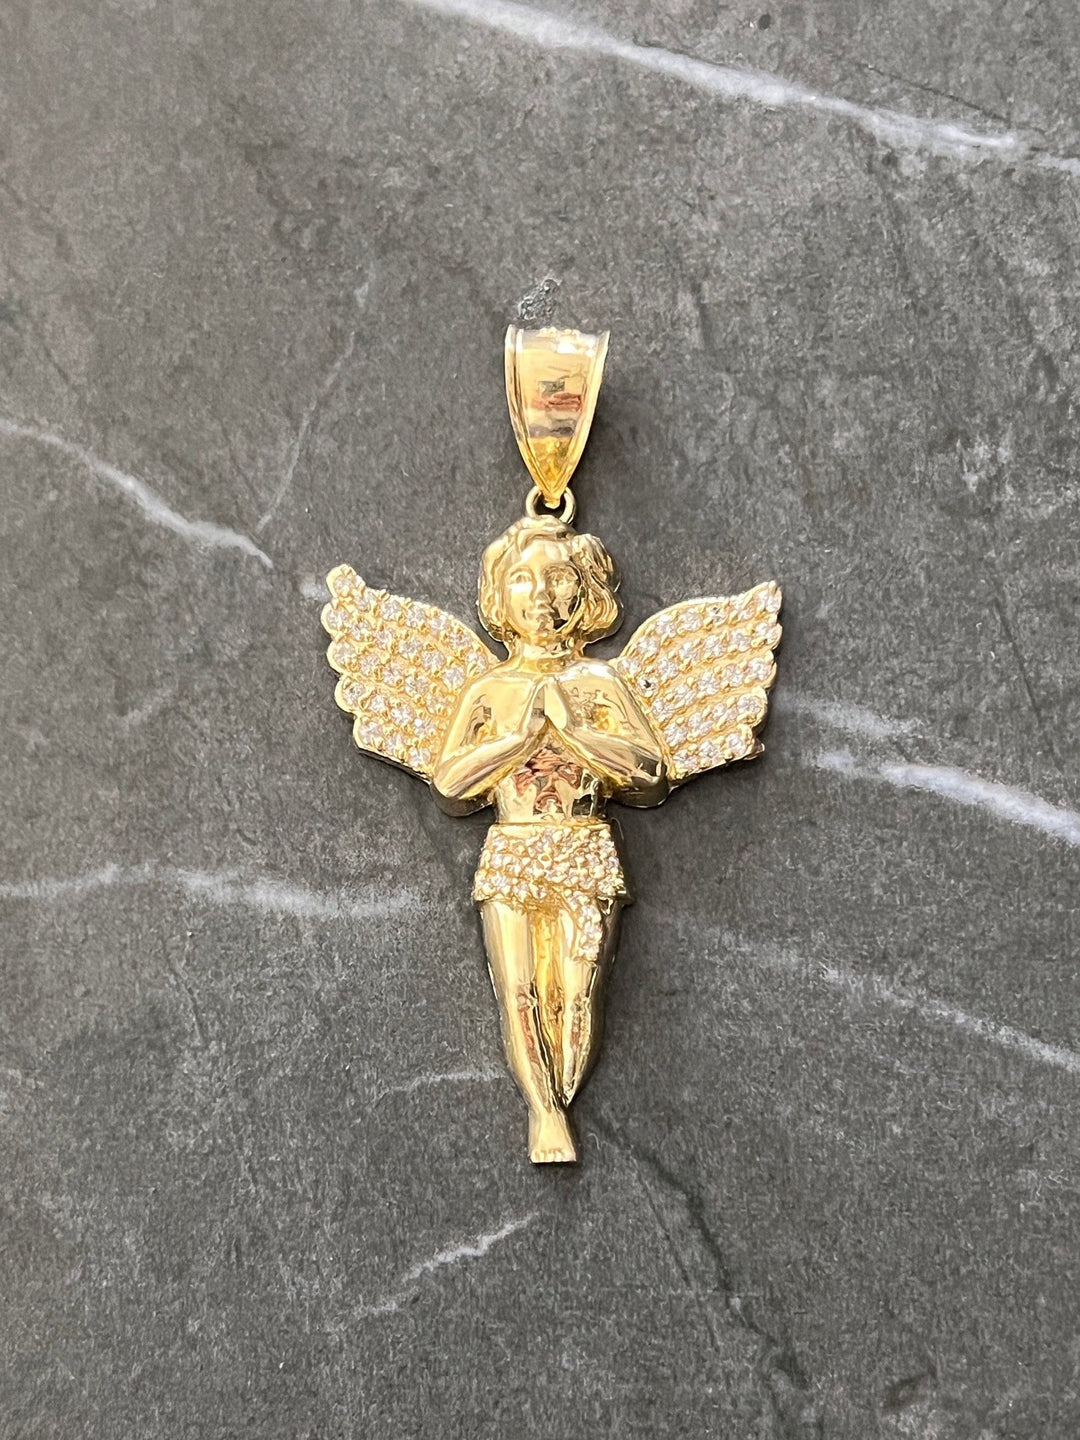 Authentic 10K Gold Guardian, Praying Baby Angel Pendant Bold Wings Charm/Pendant, Diamond Cut Solid 10K Gold Always be with You Angel Charm